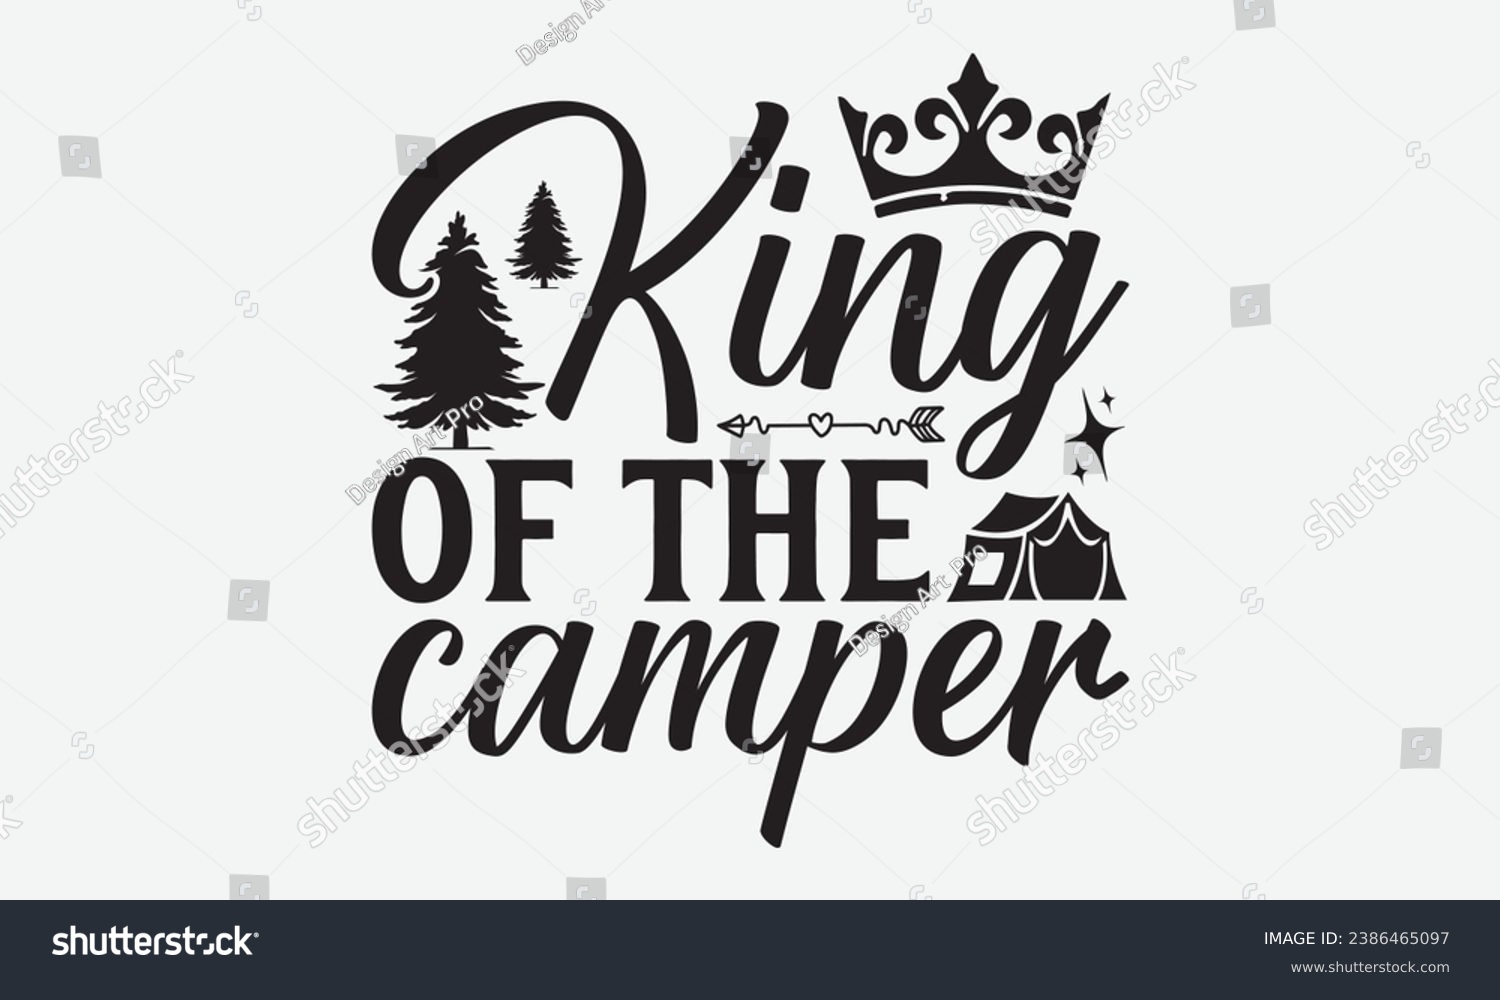 SVG of King of the camper -Camping T-Shirt Design, Handmade Calligraphy Vector Illustration, For Wall, Mugs, Cutting Machine, Silhouette Cameo, Cricut. svg